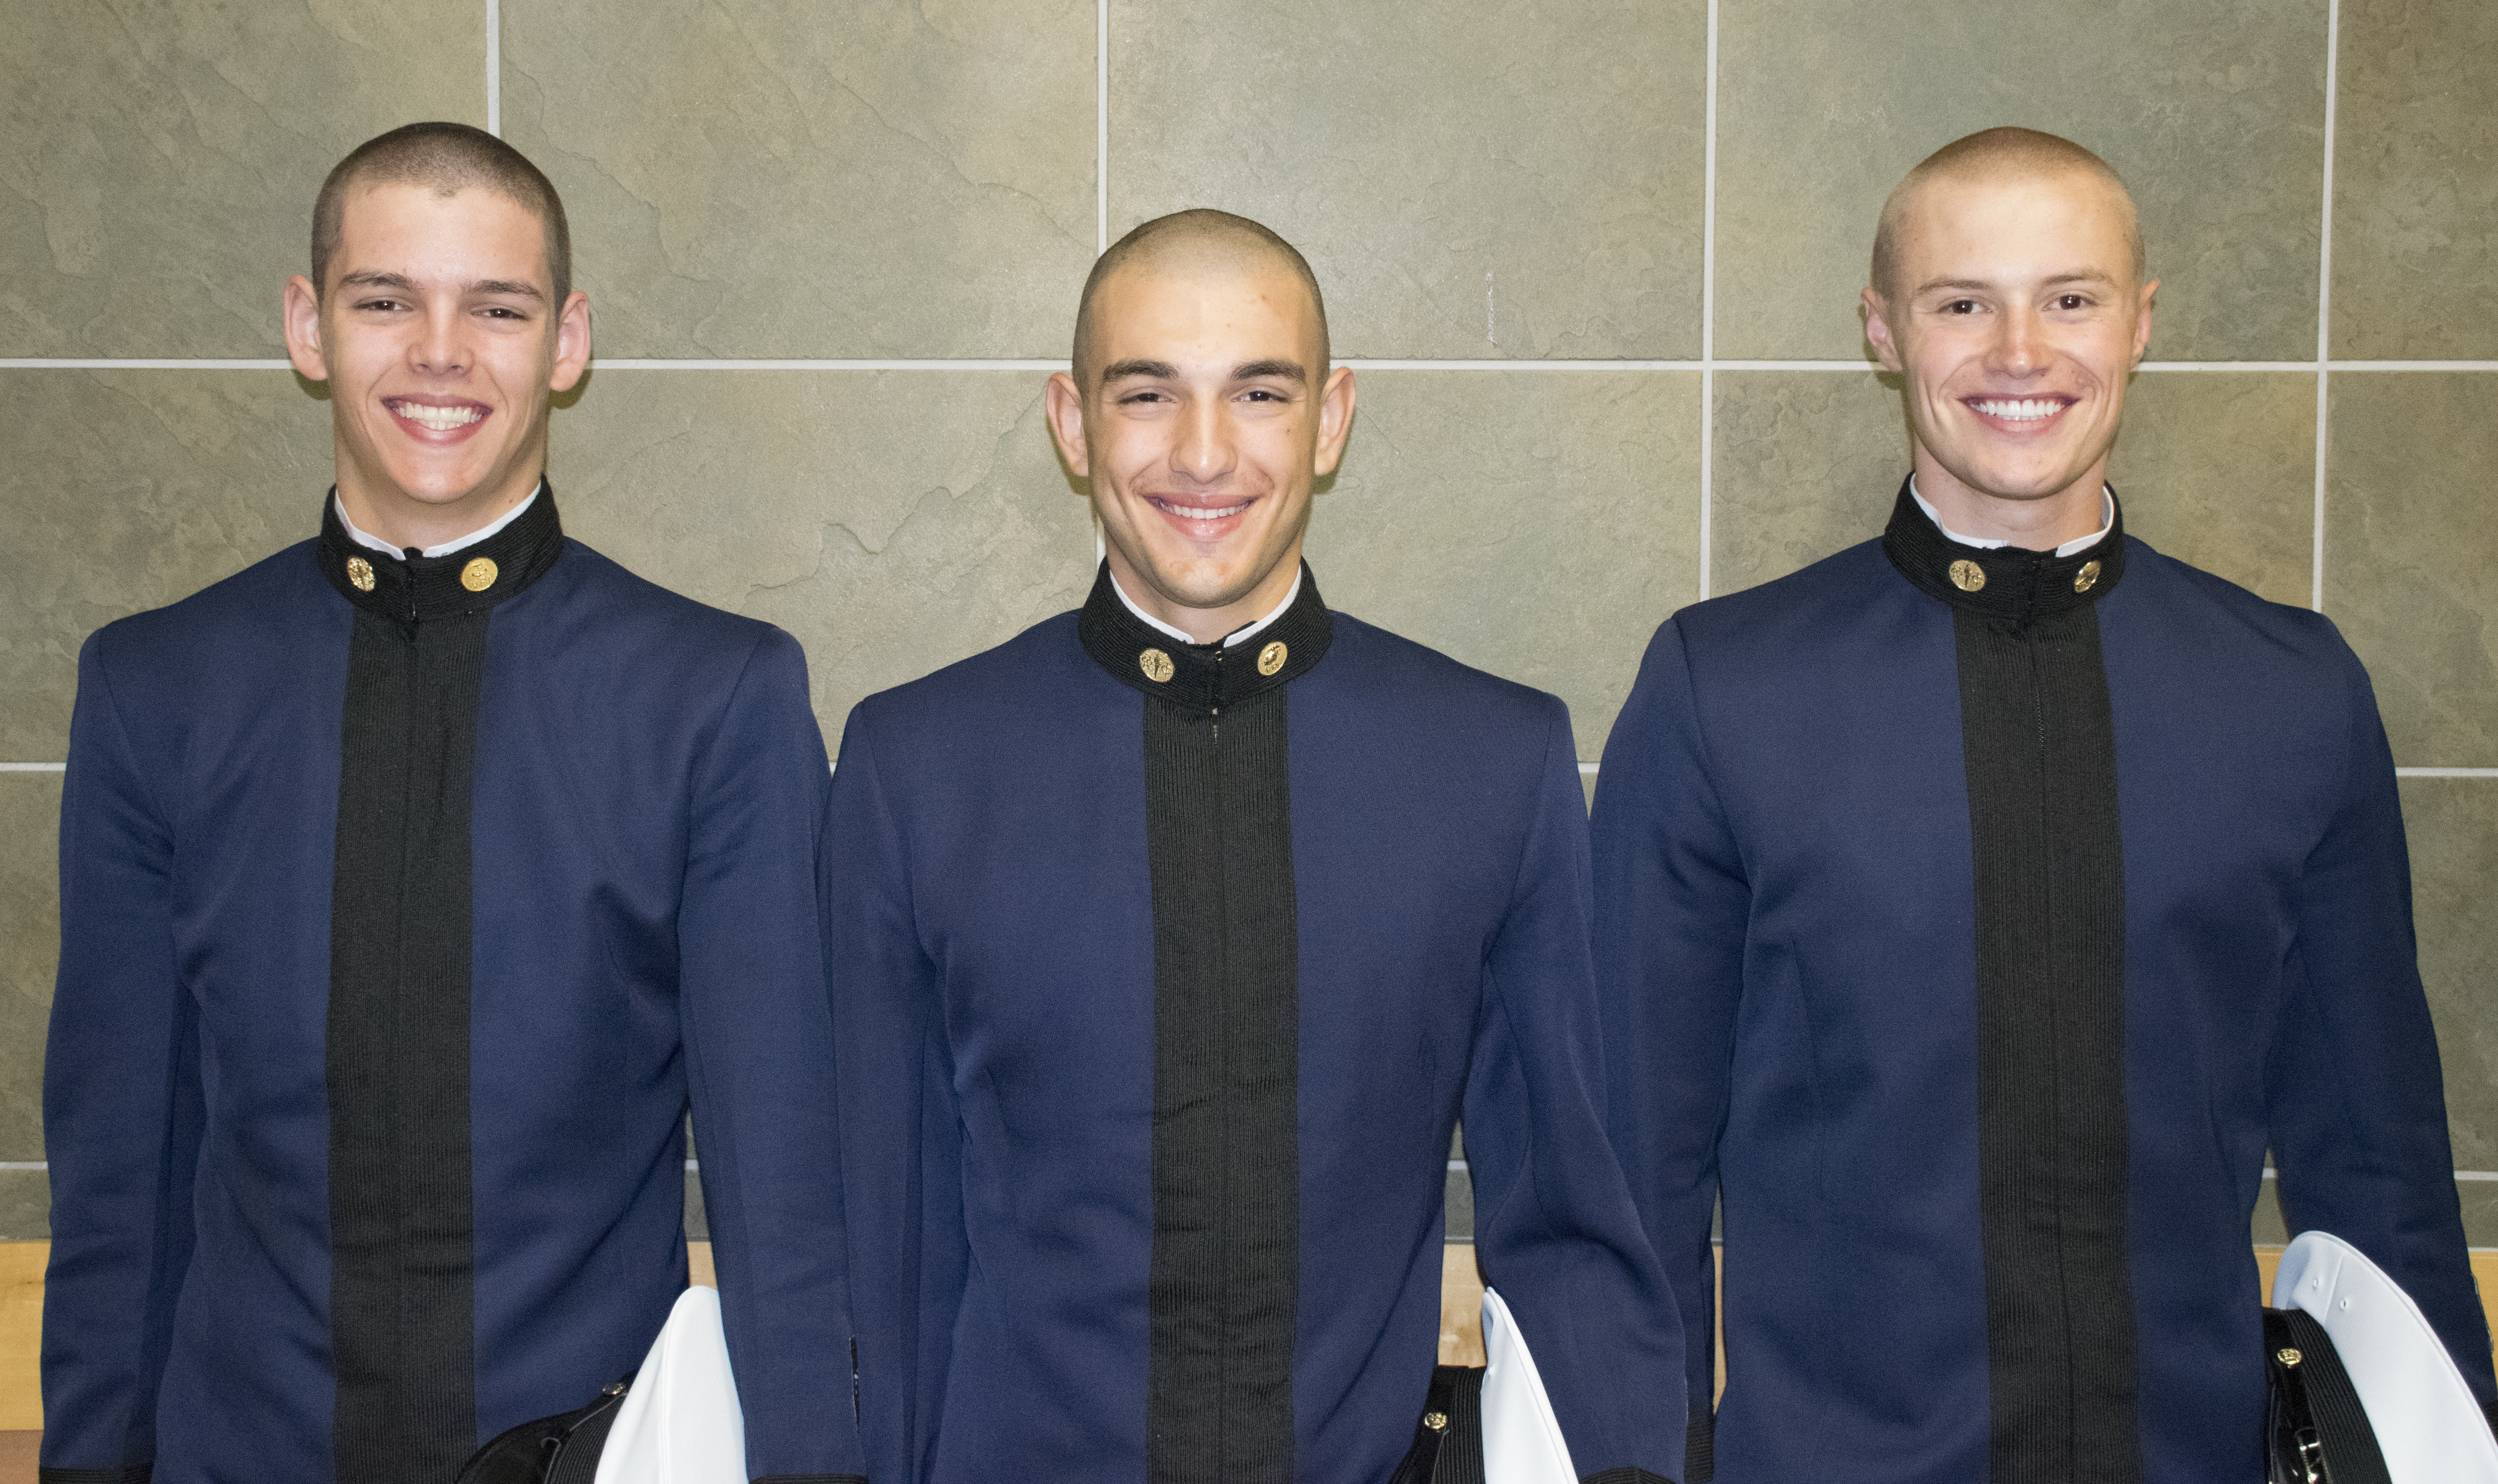 From left to right are Cadets Thomas DiBiaso, Brandon Boccher, and Philip Anderson.